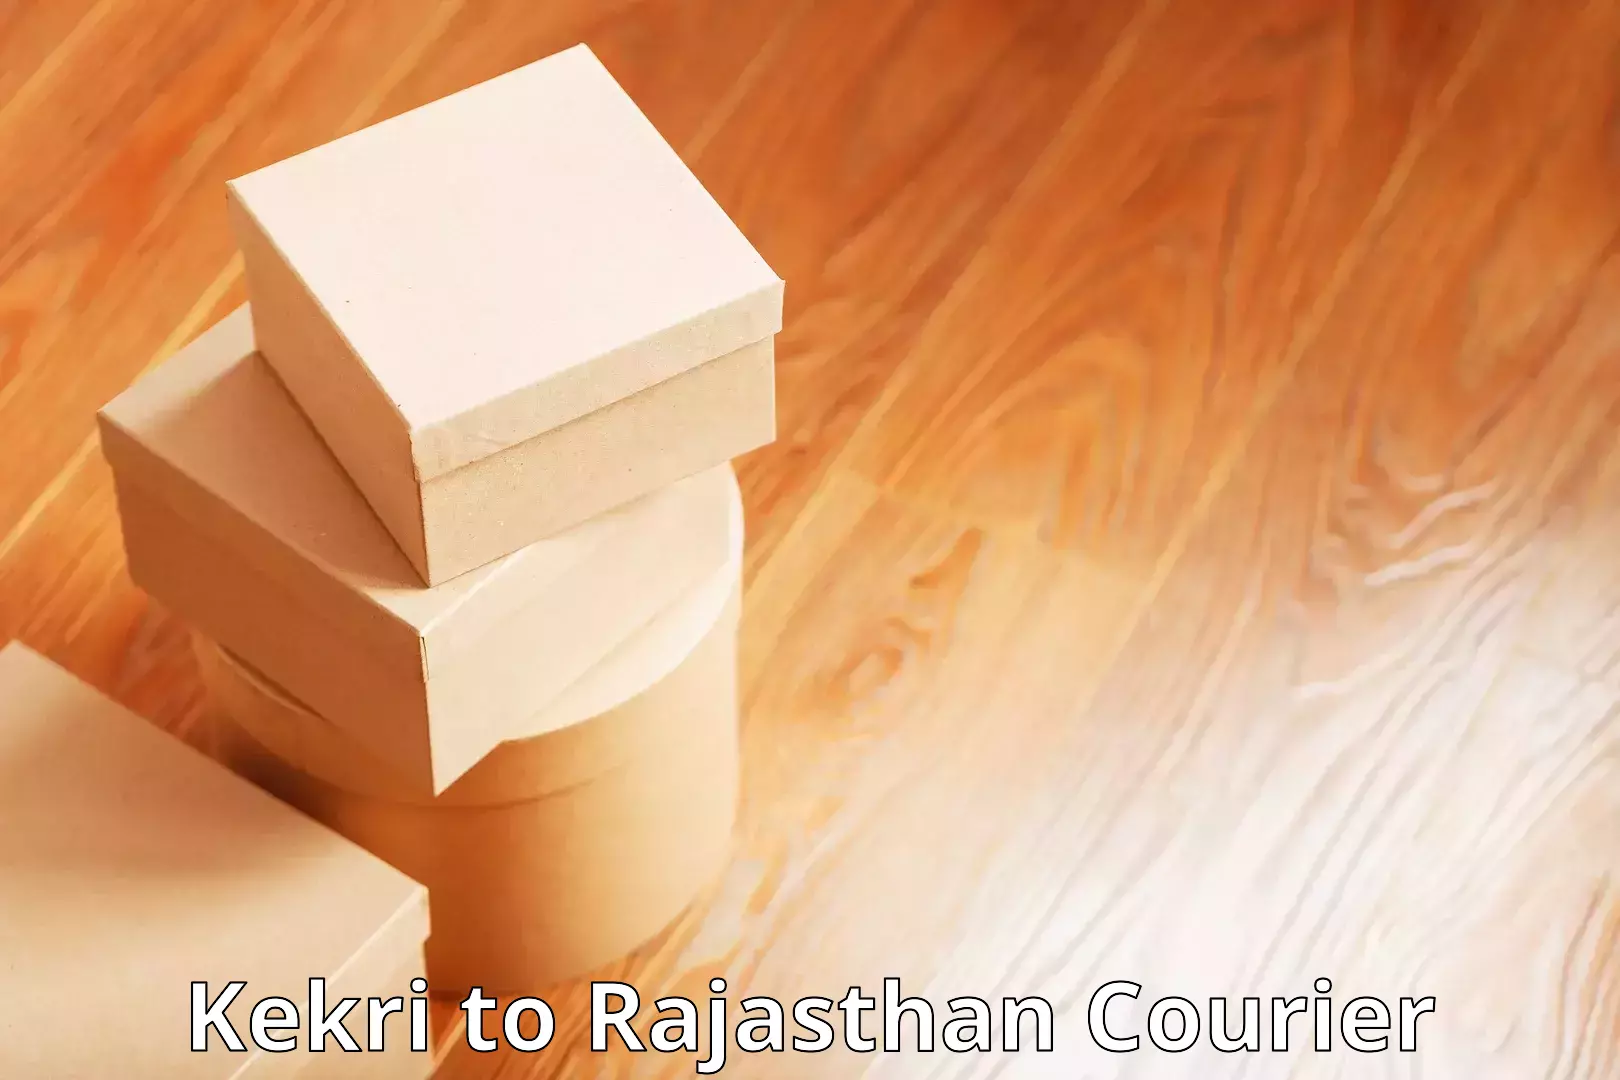 Flexible delivery scheduling Kekri to Rajasthan